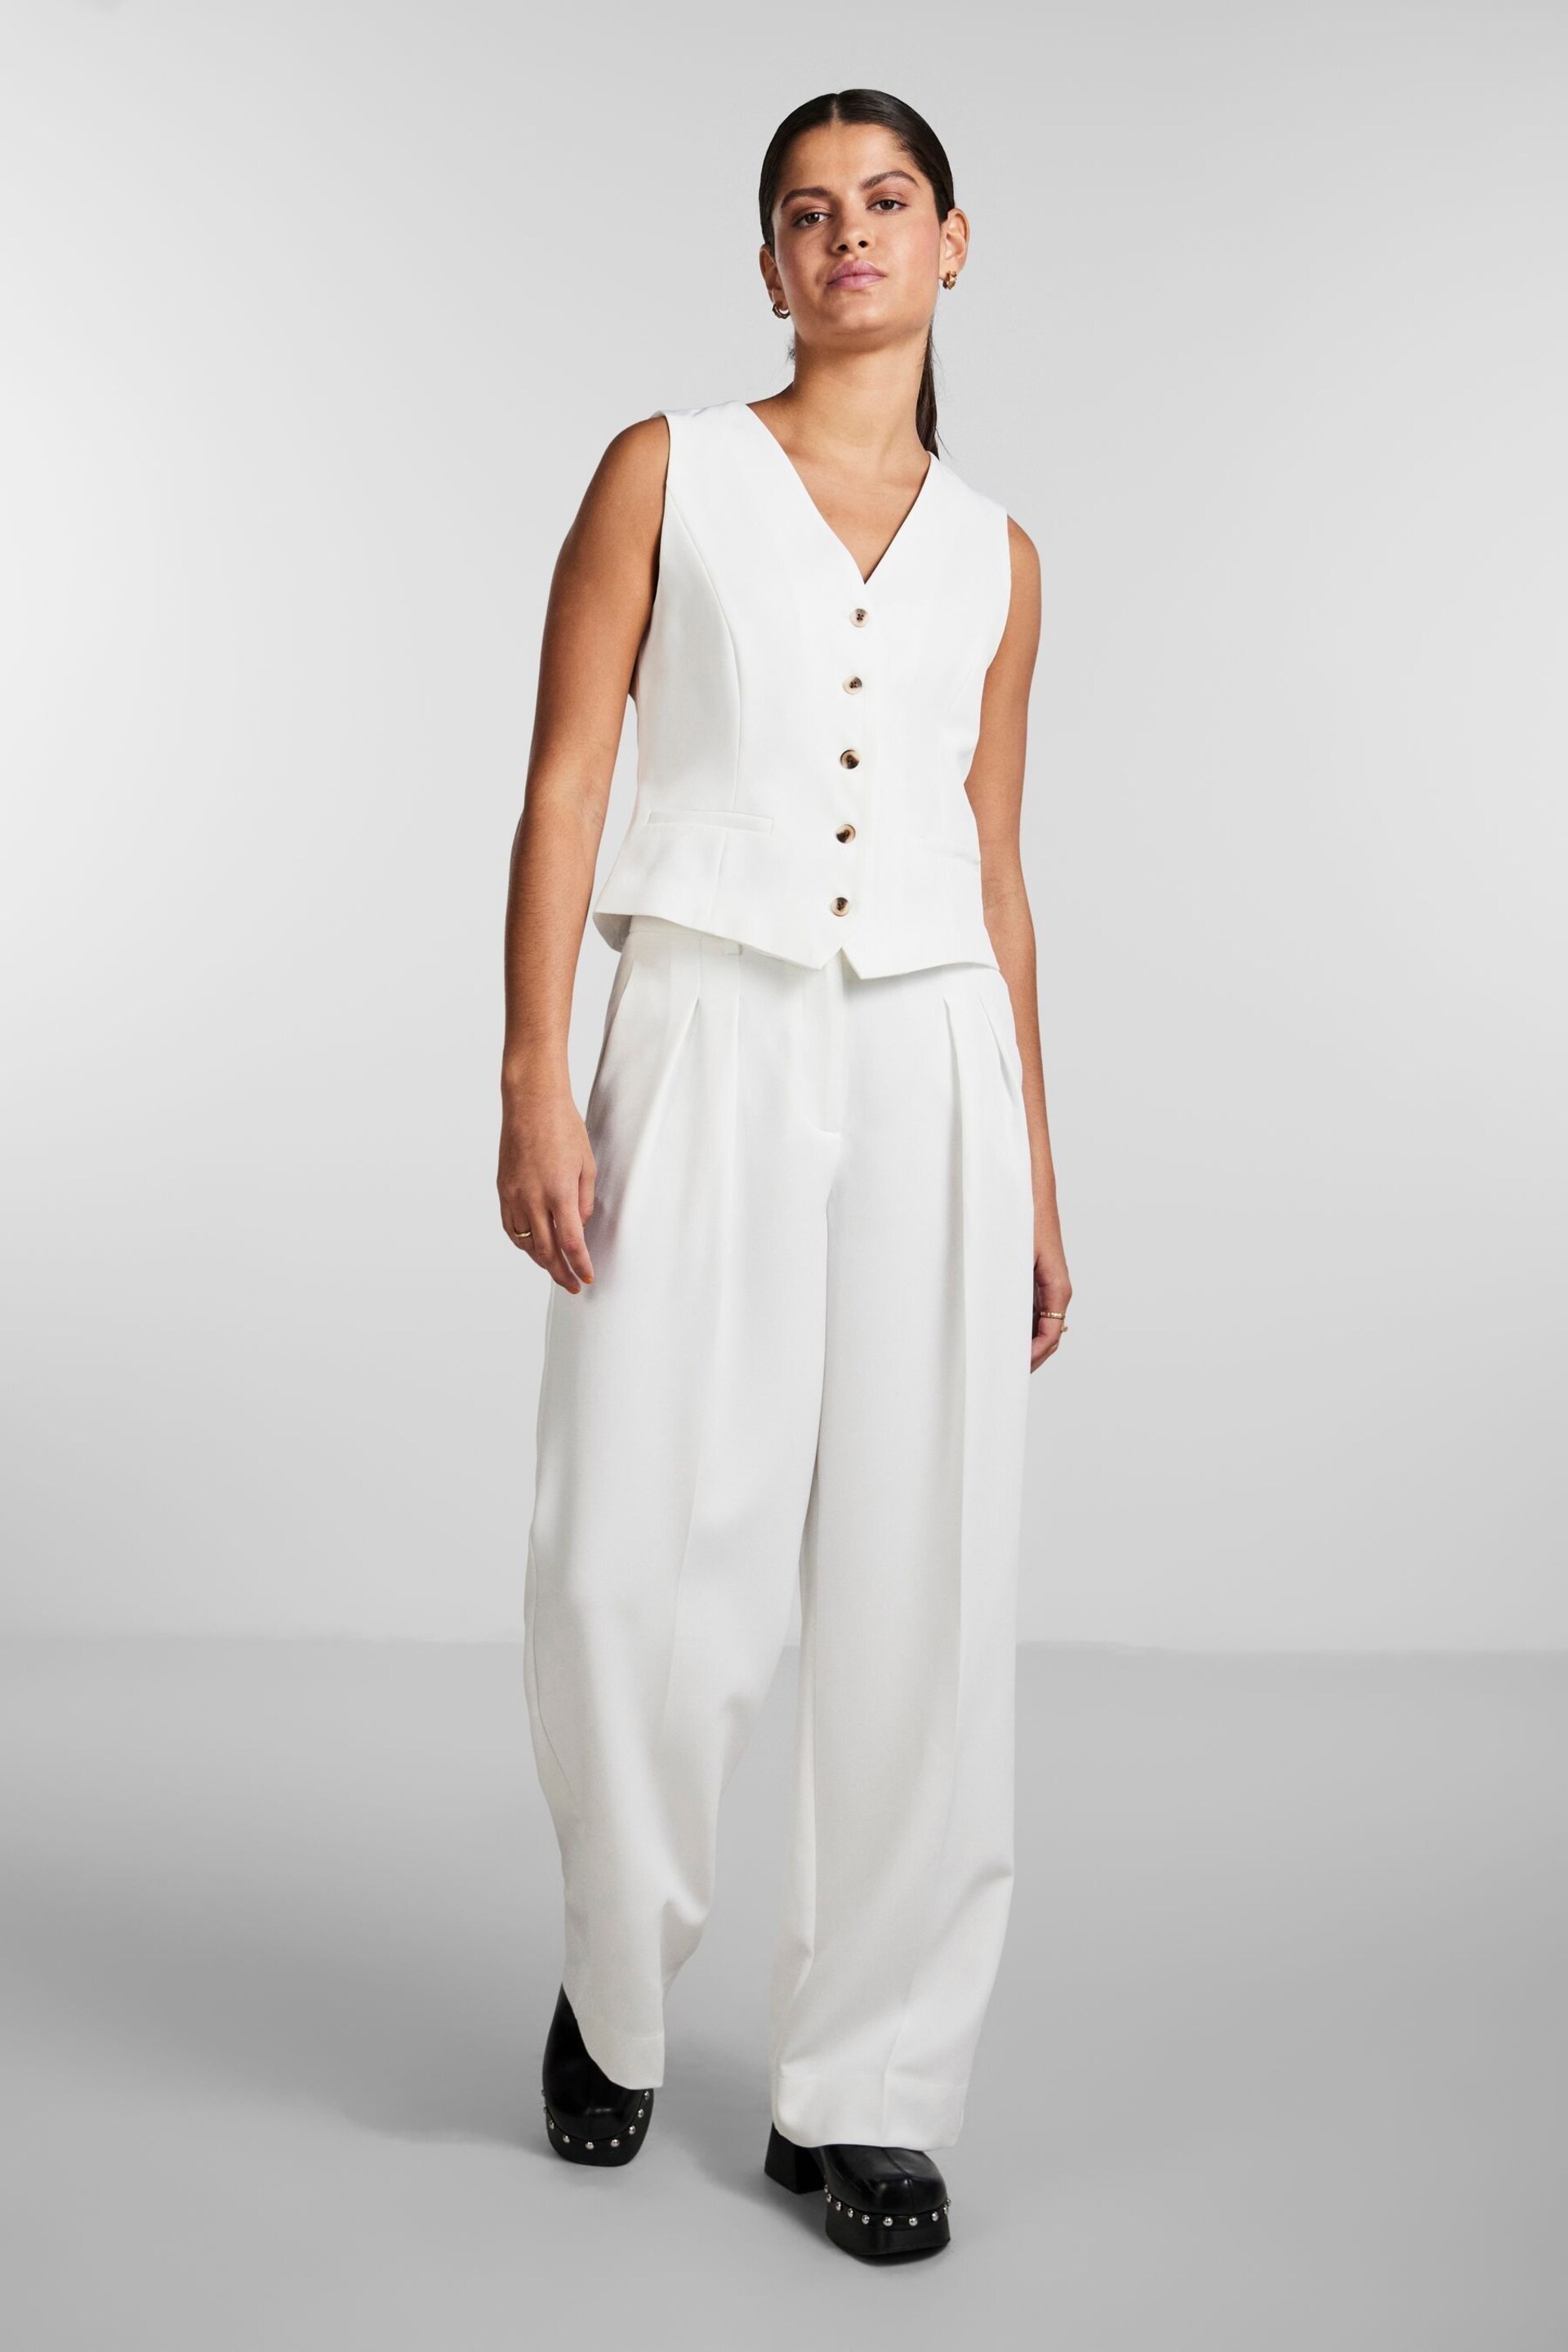 PIECES White High Waisted Wide Leg Trousers - Image 2 of 5